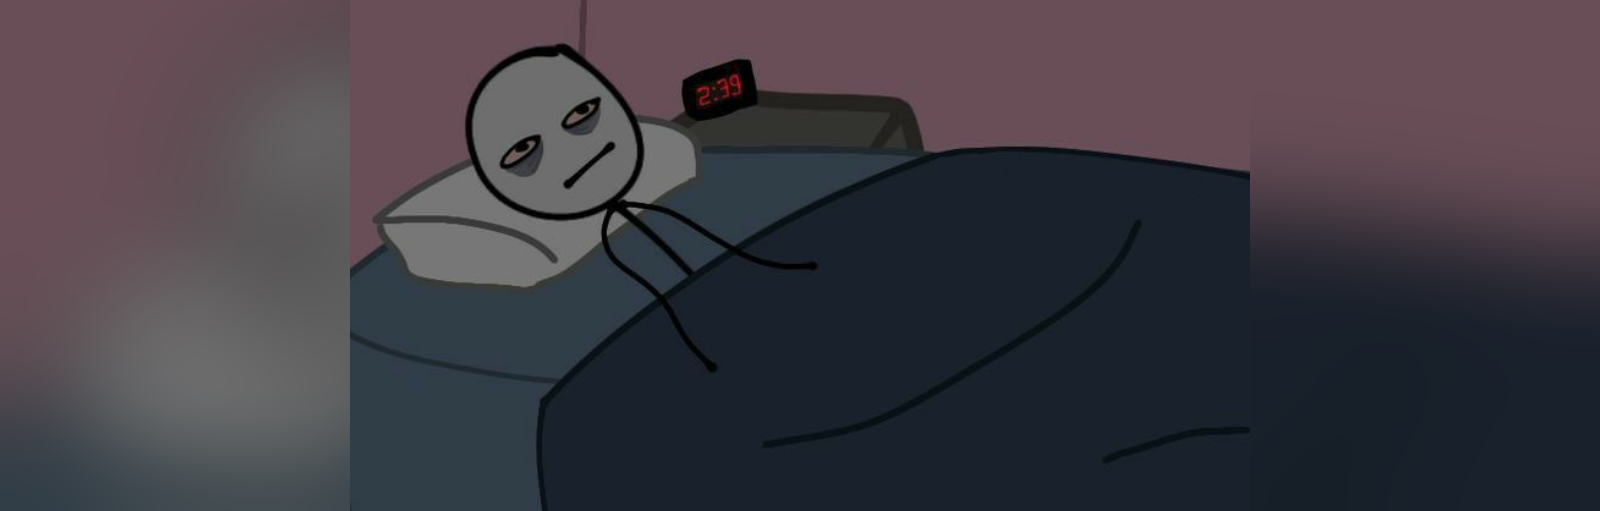 Stickman in bed thinking Blank Meme Template